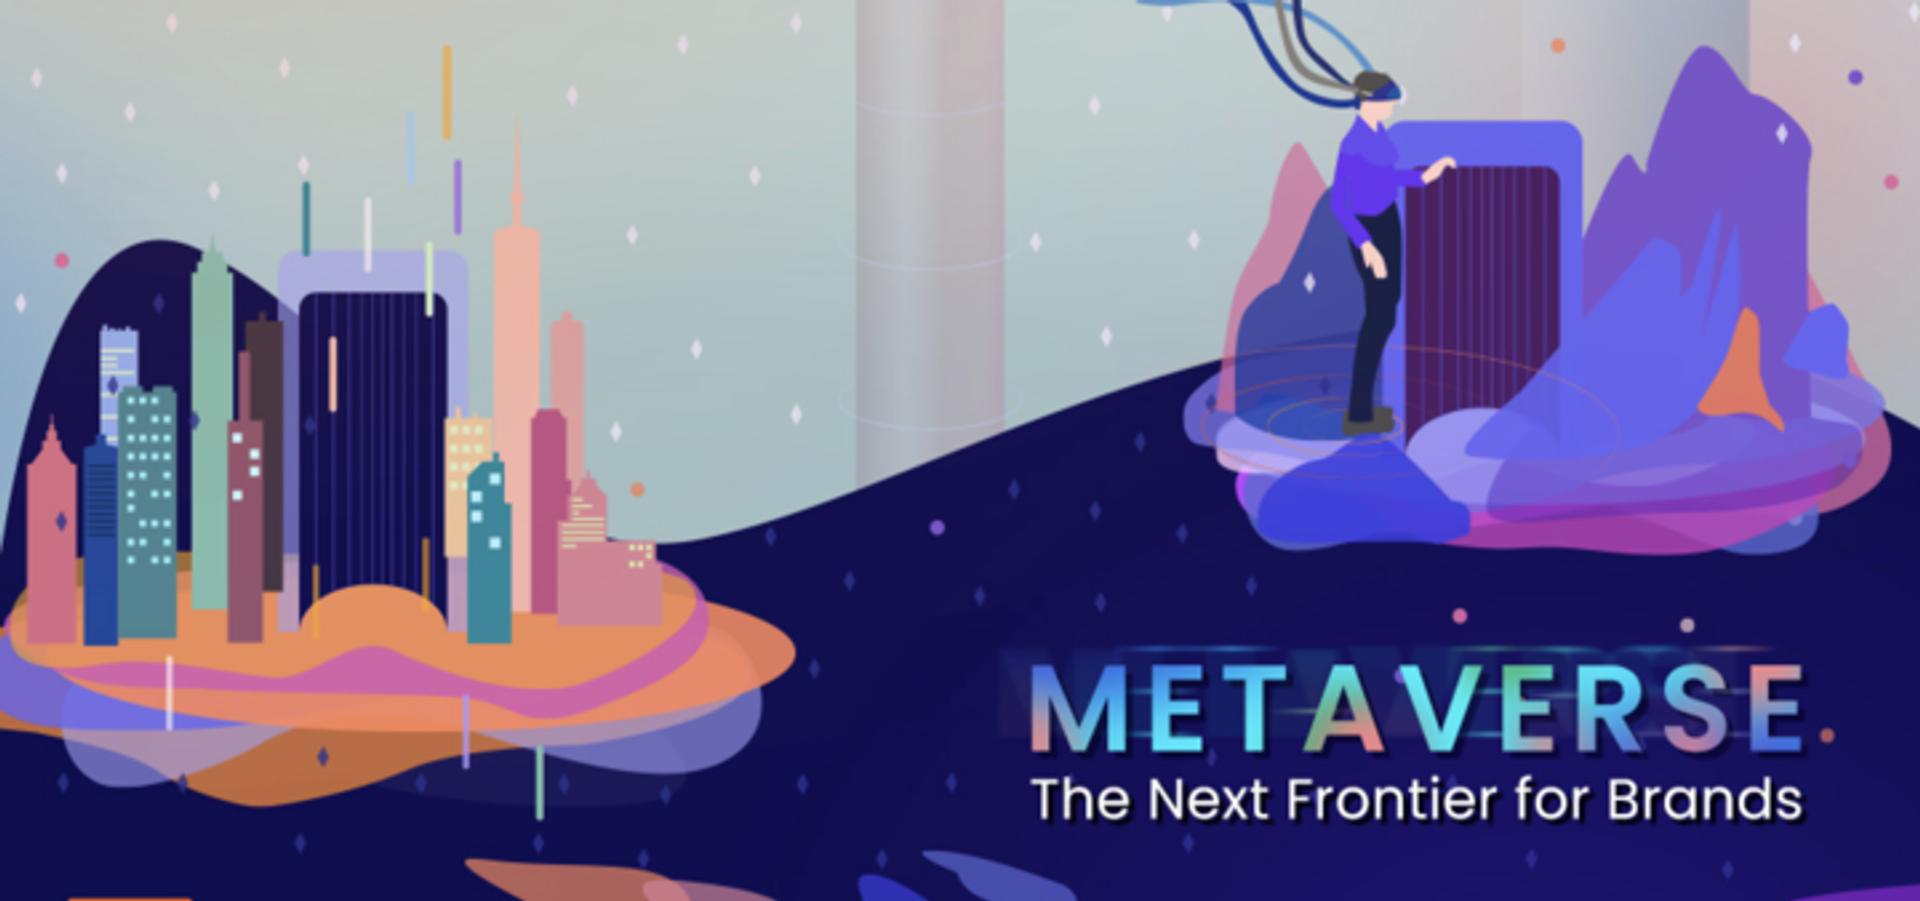 How to join the Metaverse? A complete guide for brands and businesses to make their move